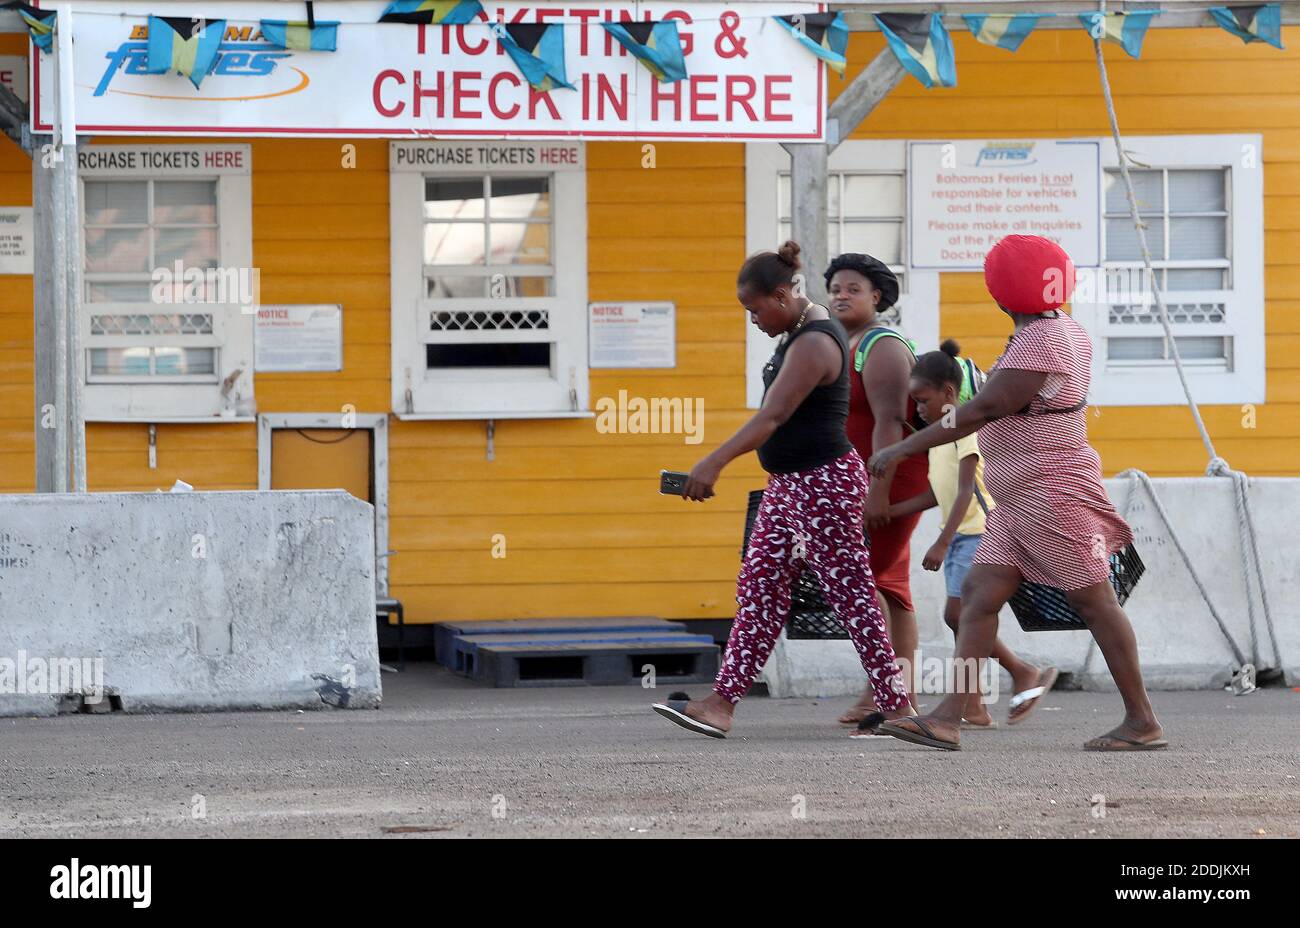 NO FILM, NO VIDEO, NO TV, NO DOCUMENTARY - Haitian women and children leave the dock in Nassau after taking a ferry from Abaco to escape the damage after Hurricane Dorian. Nassau, Bahamas, September 8, 2019. Photo by Mike Stocker/South Florida Sun Sentinel/TNS/ABACAPRESS.COM Stock Photo